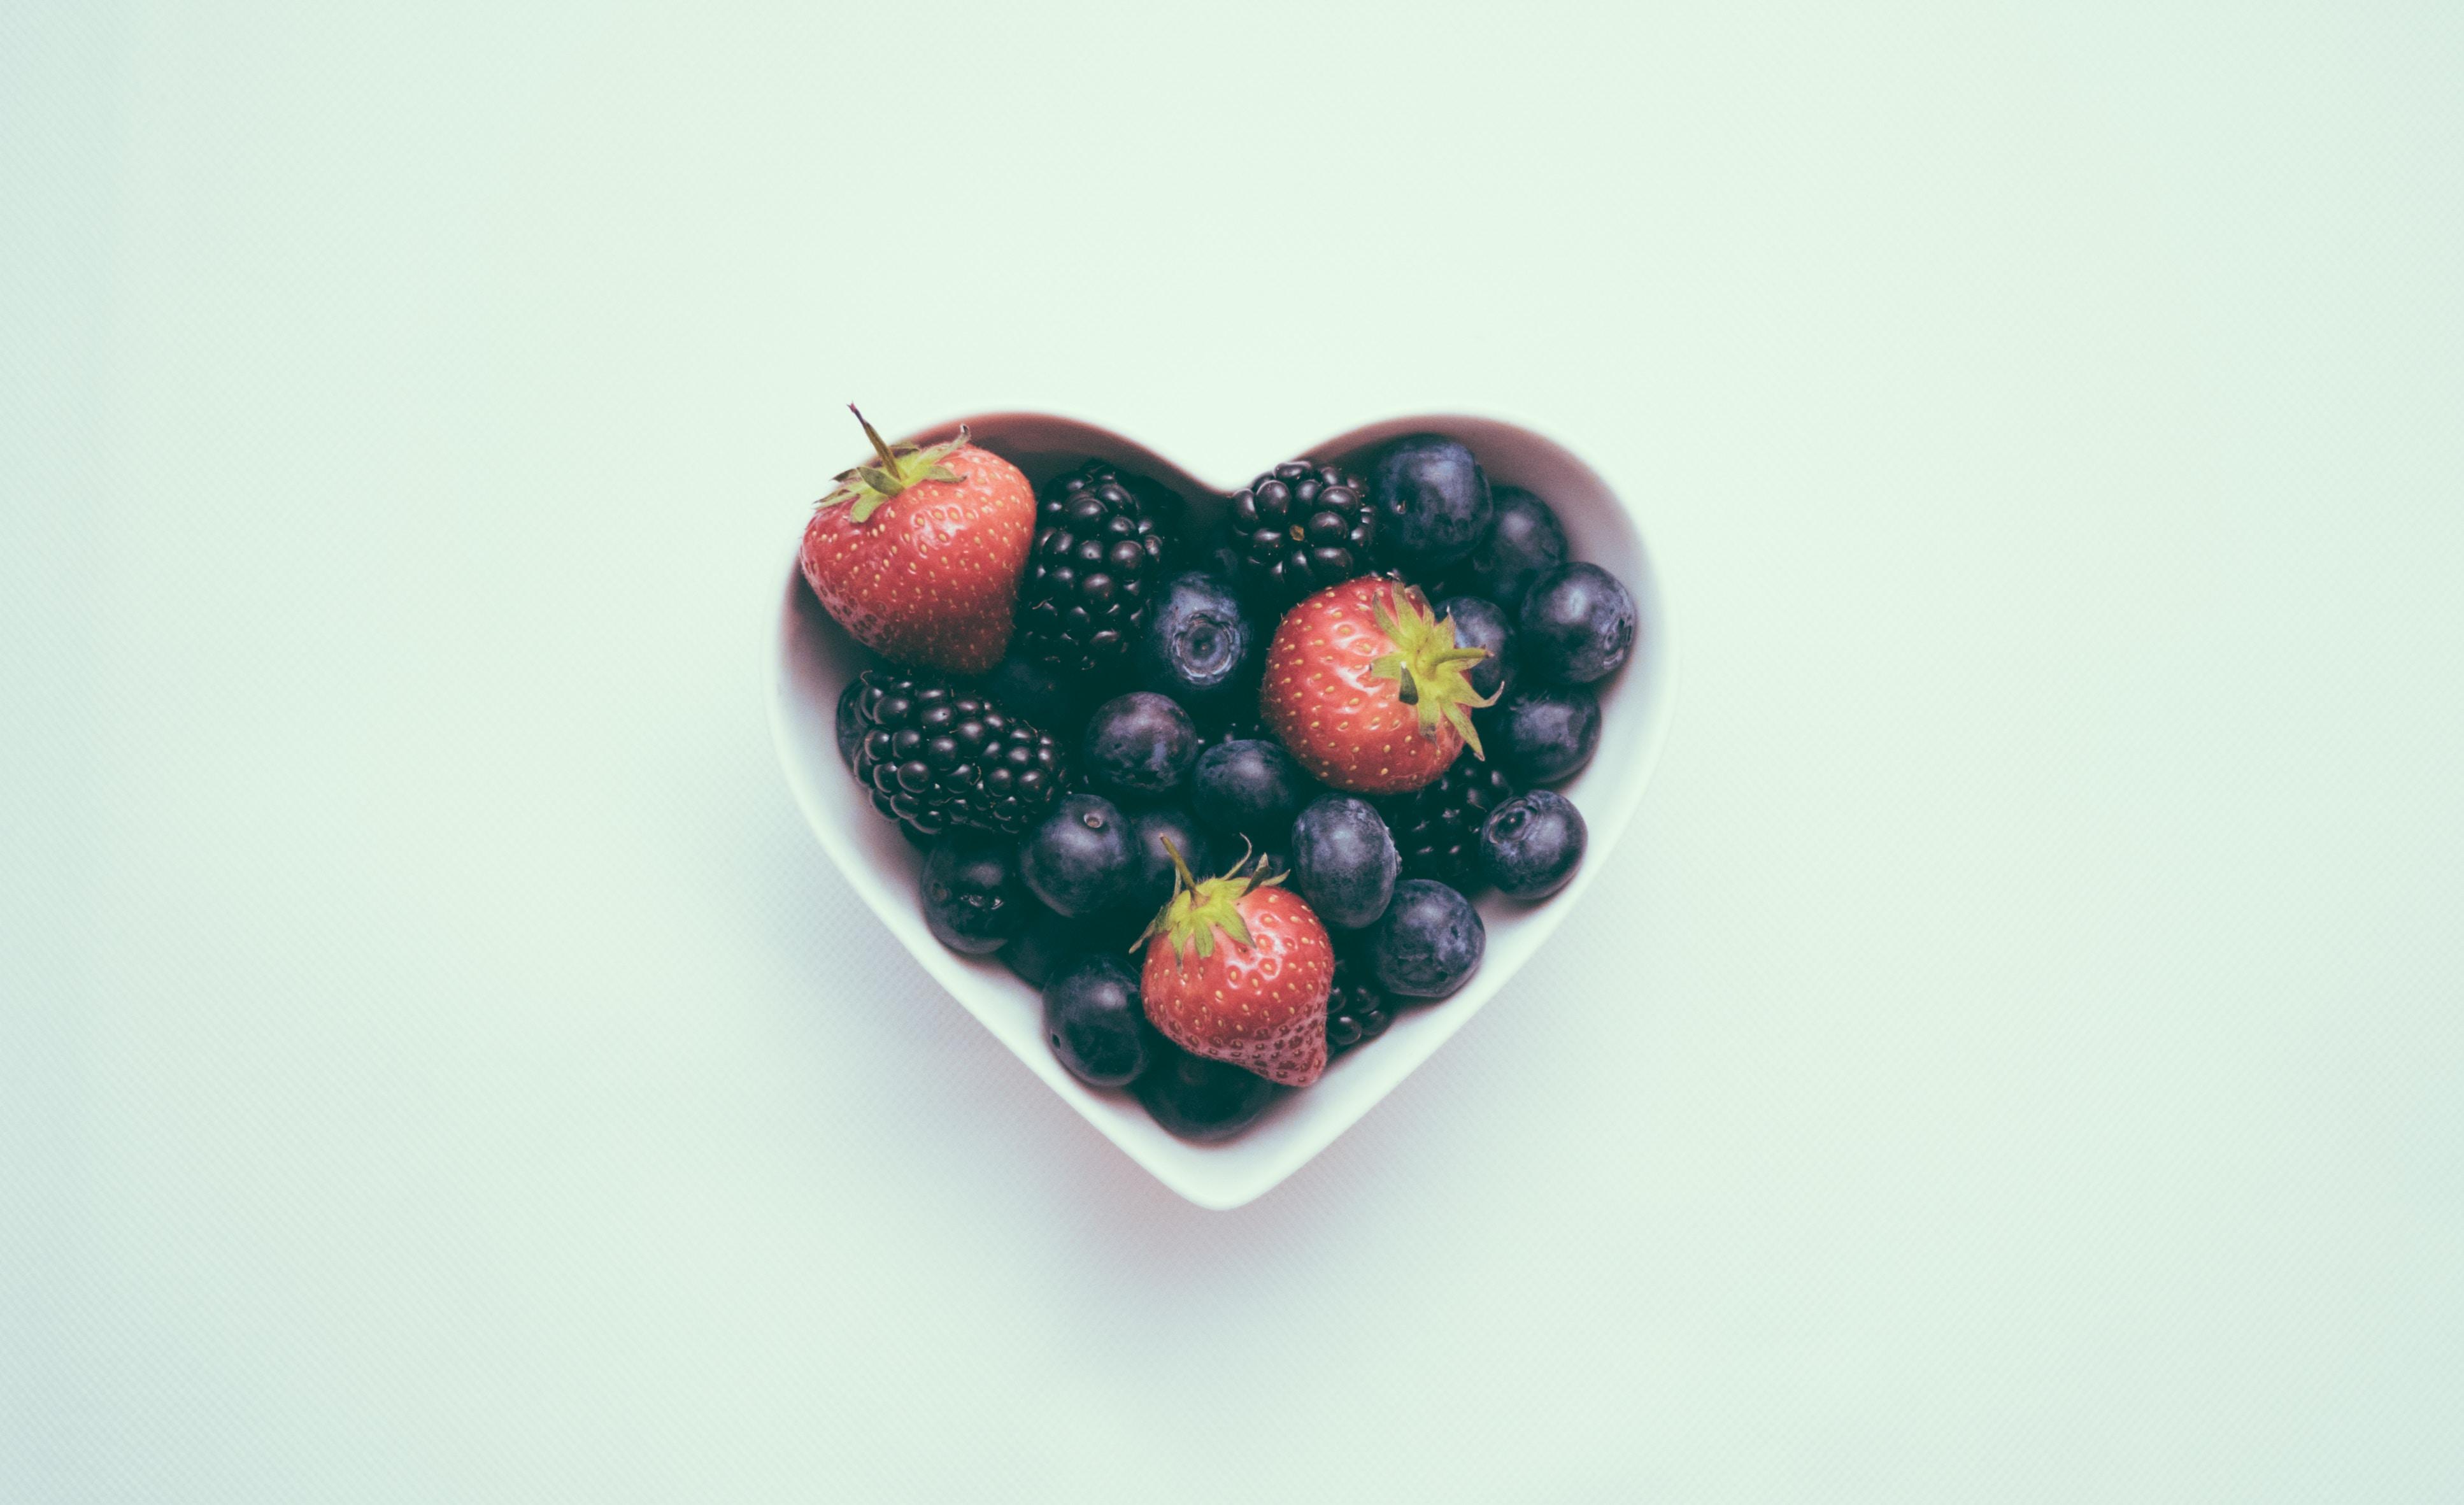 Making Good Health Your Heart's Desire